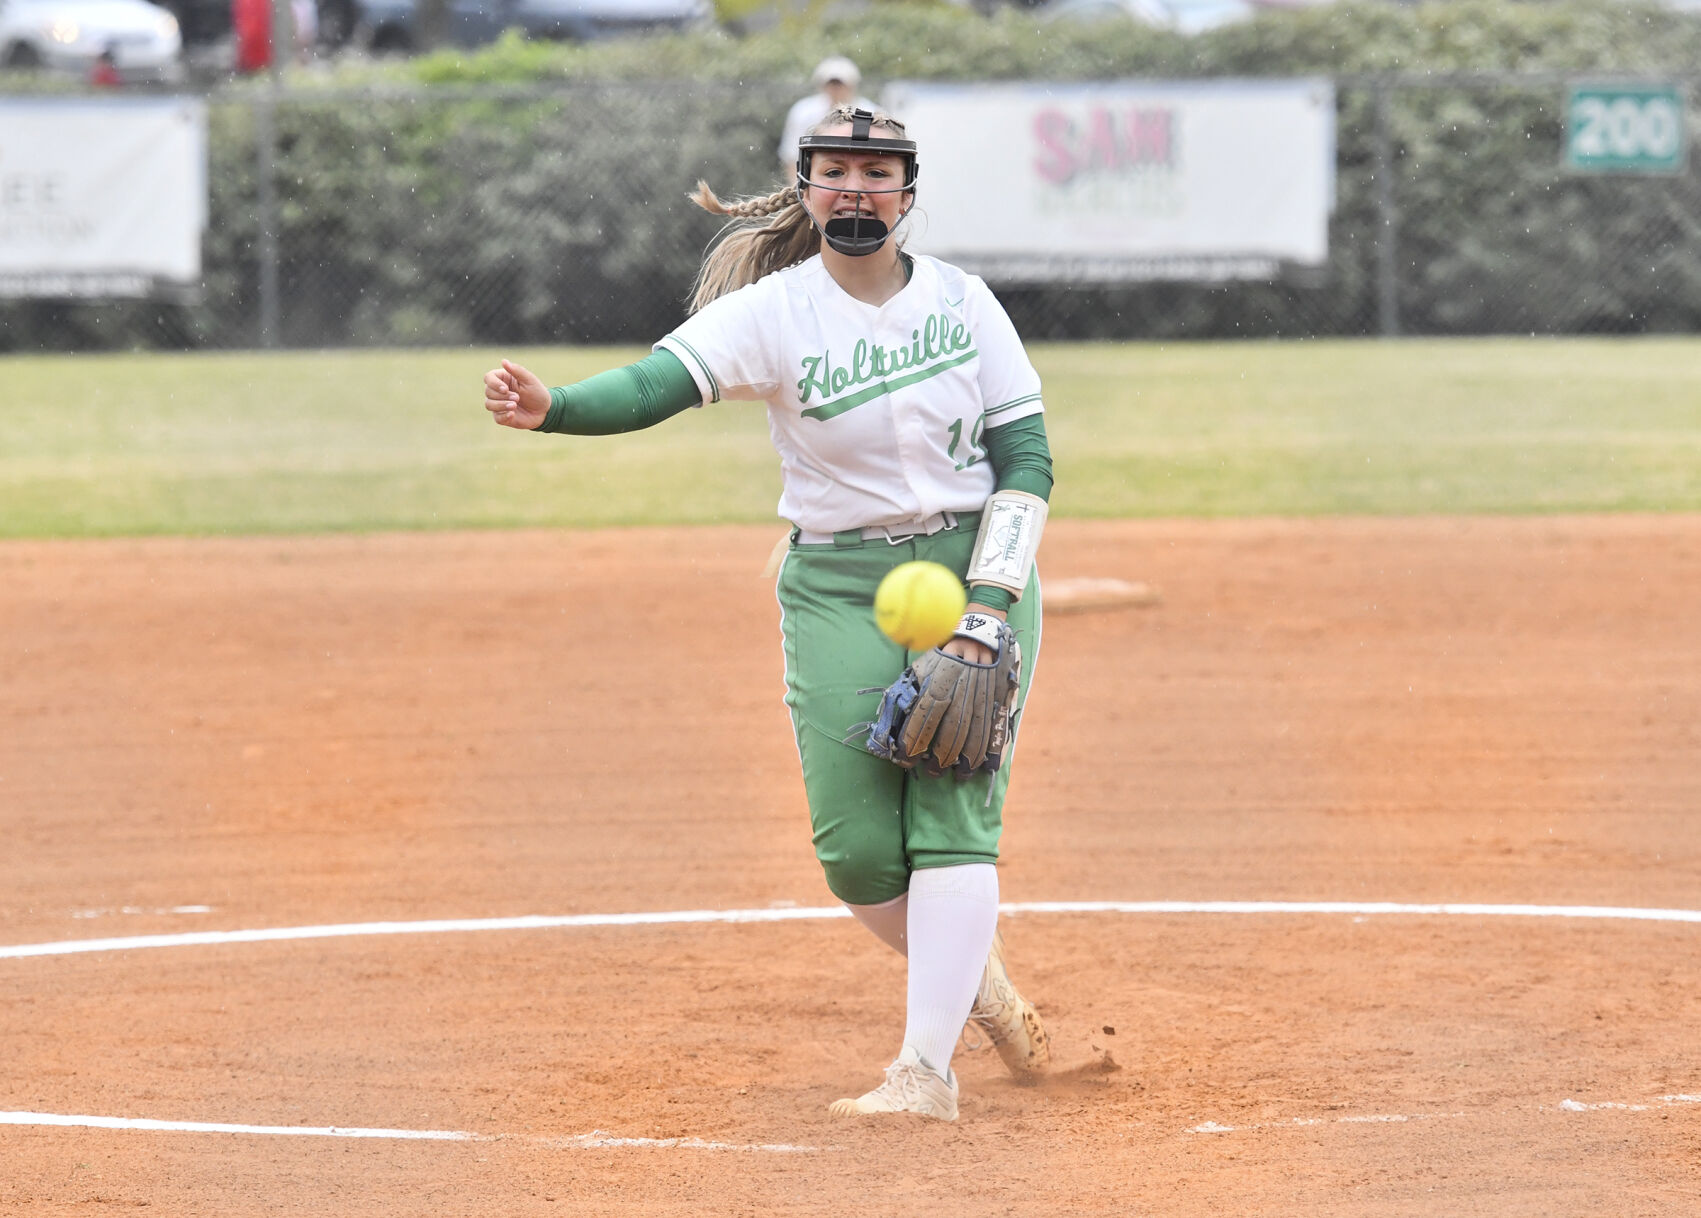 Holtville softball stuns defending champs with 14-13 win in extra innings